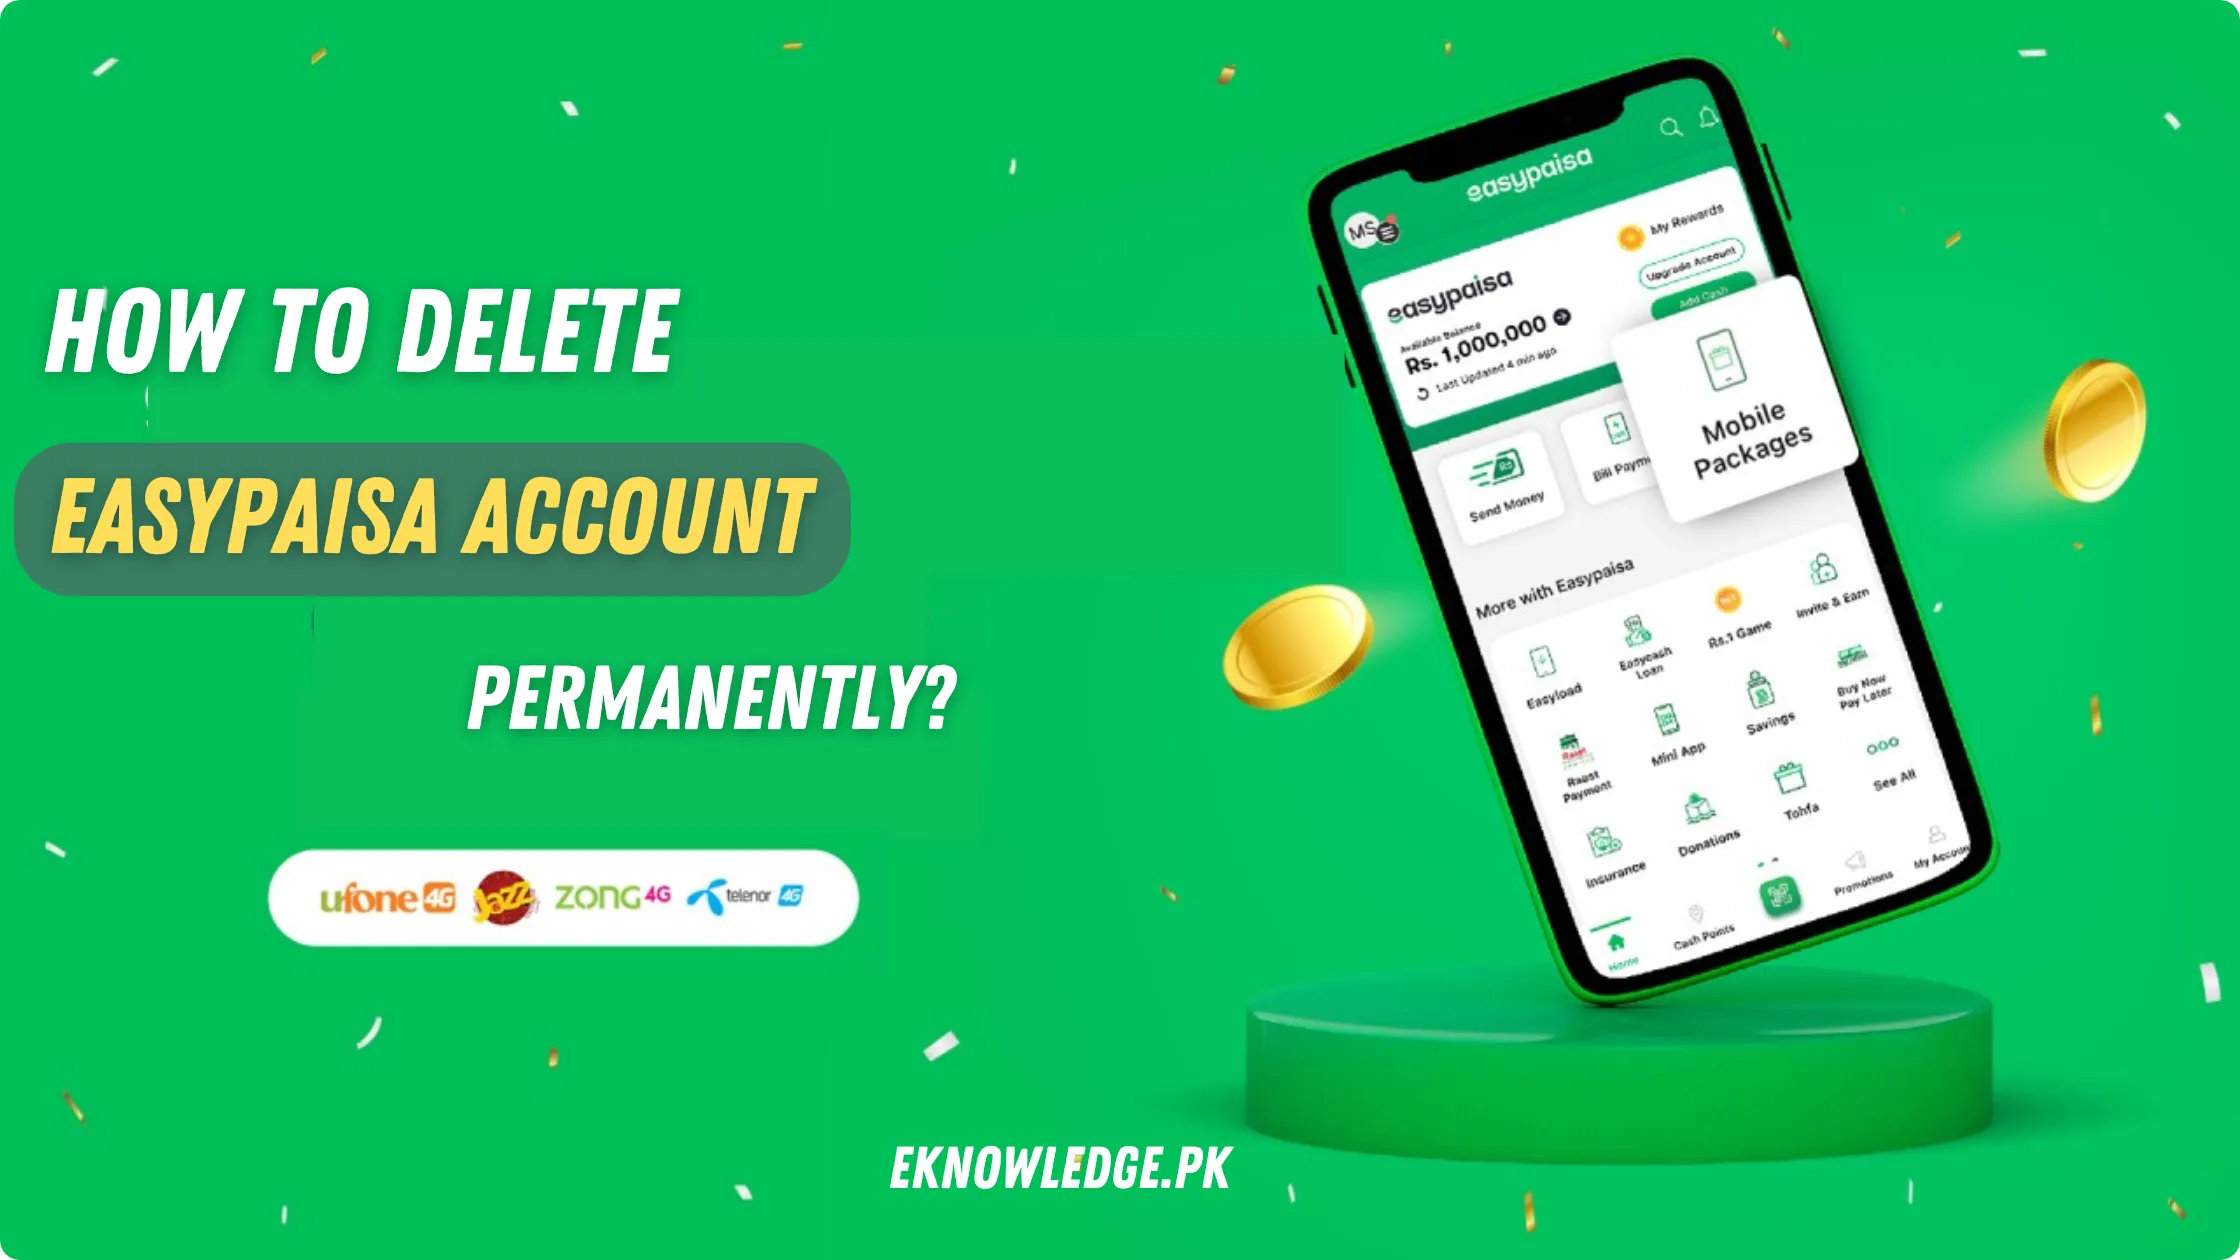 How to Delete Easypaisa Account Permanently